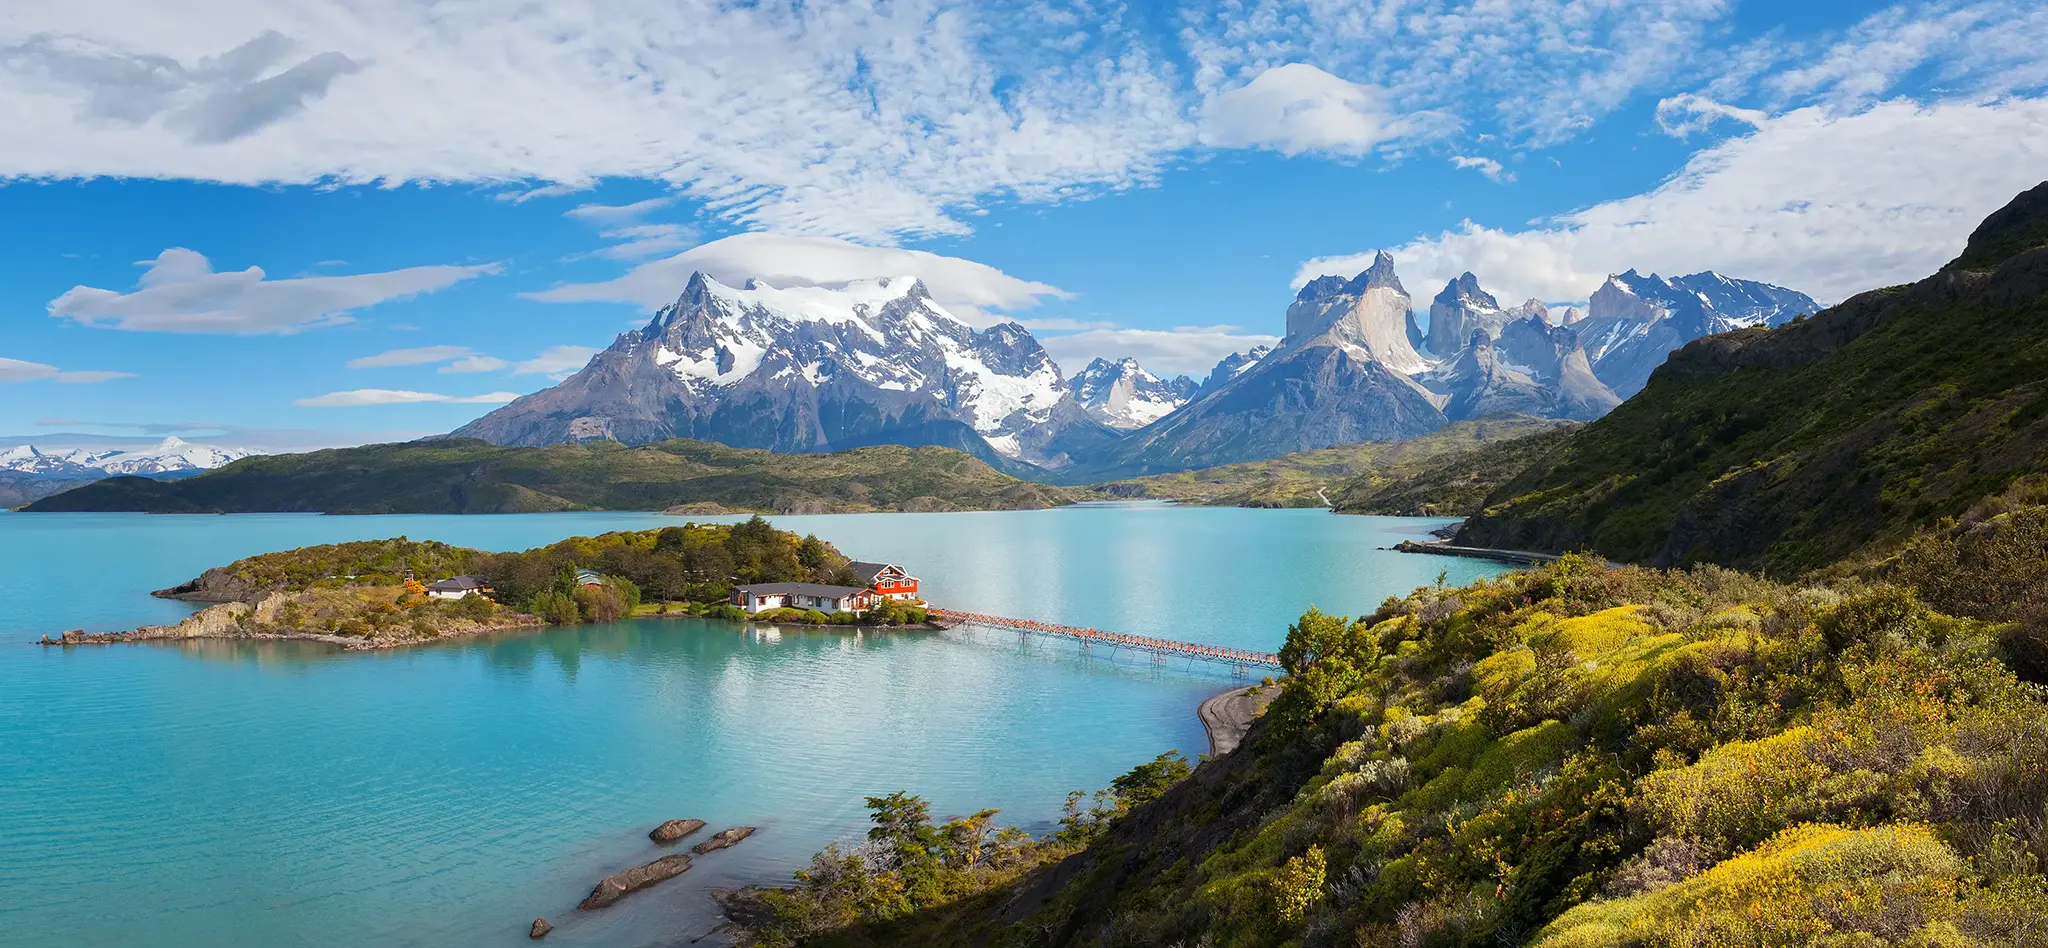 Panoramic view of Lake Pehoé at Torres del Paine National Park, Chile.